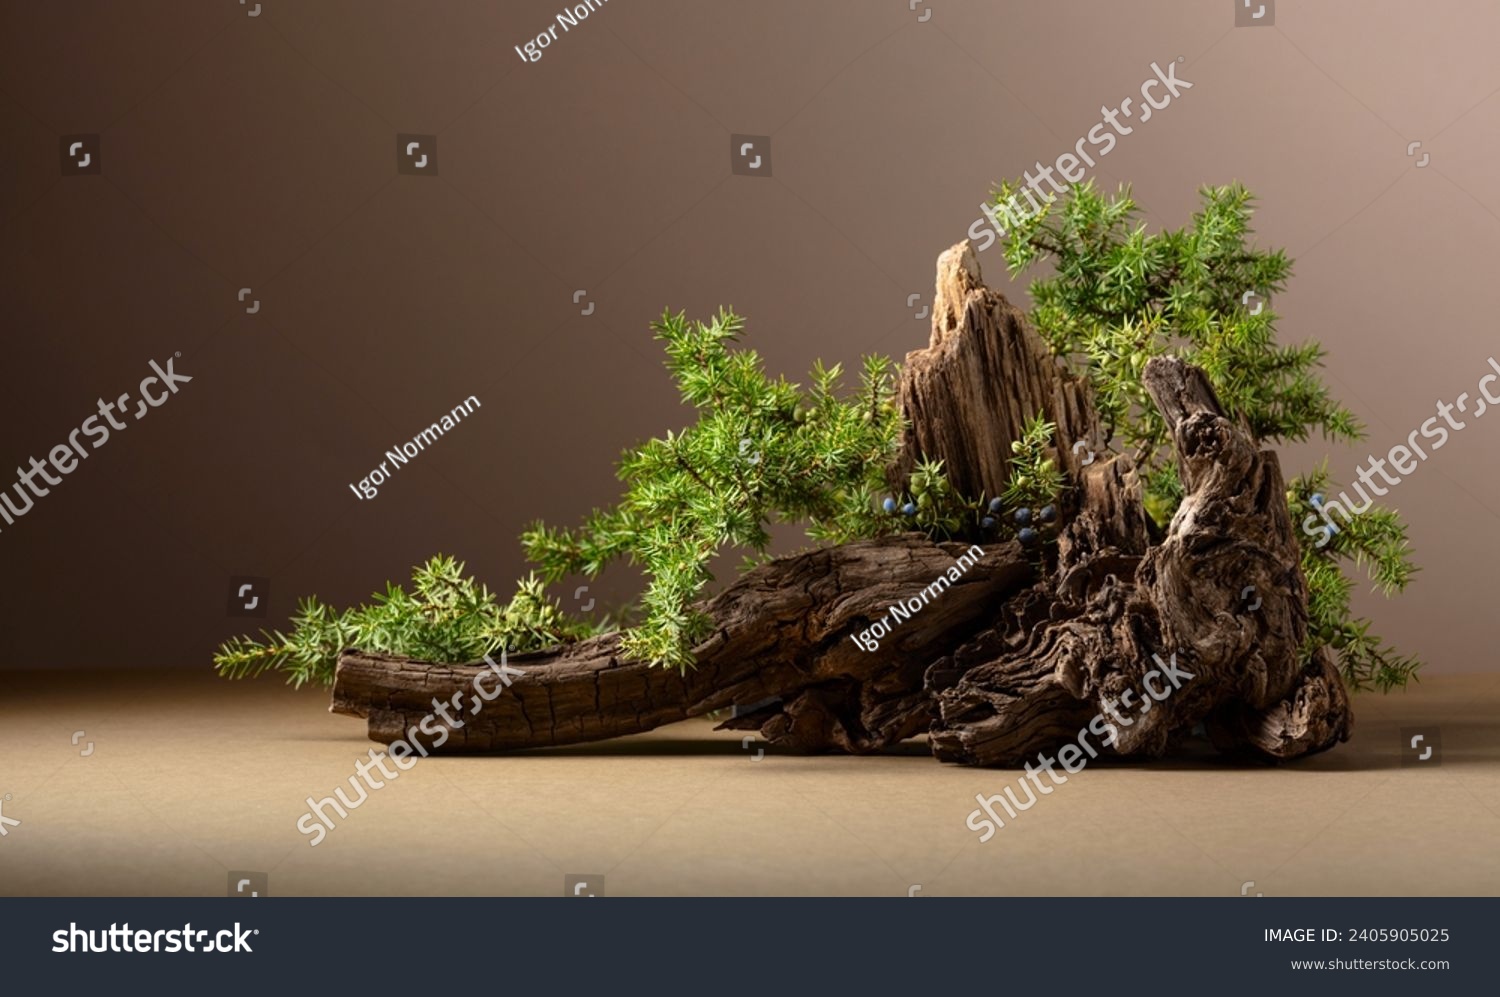 Abstract nature scene with a composition of juniper and dry snags. Neutral beige background for cosmetic, beauty product branding, identity, and packaging. Copy space, front view. #2405905025